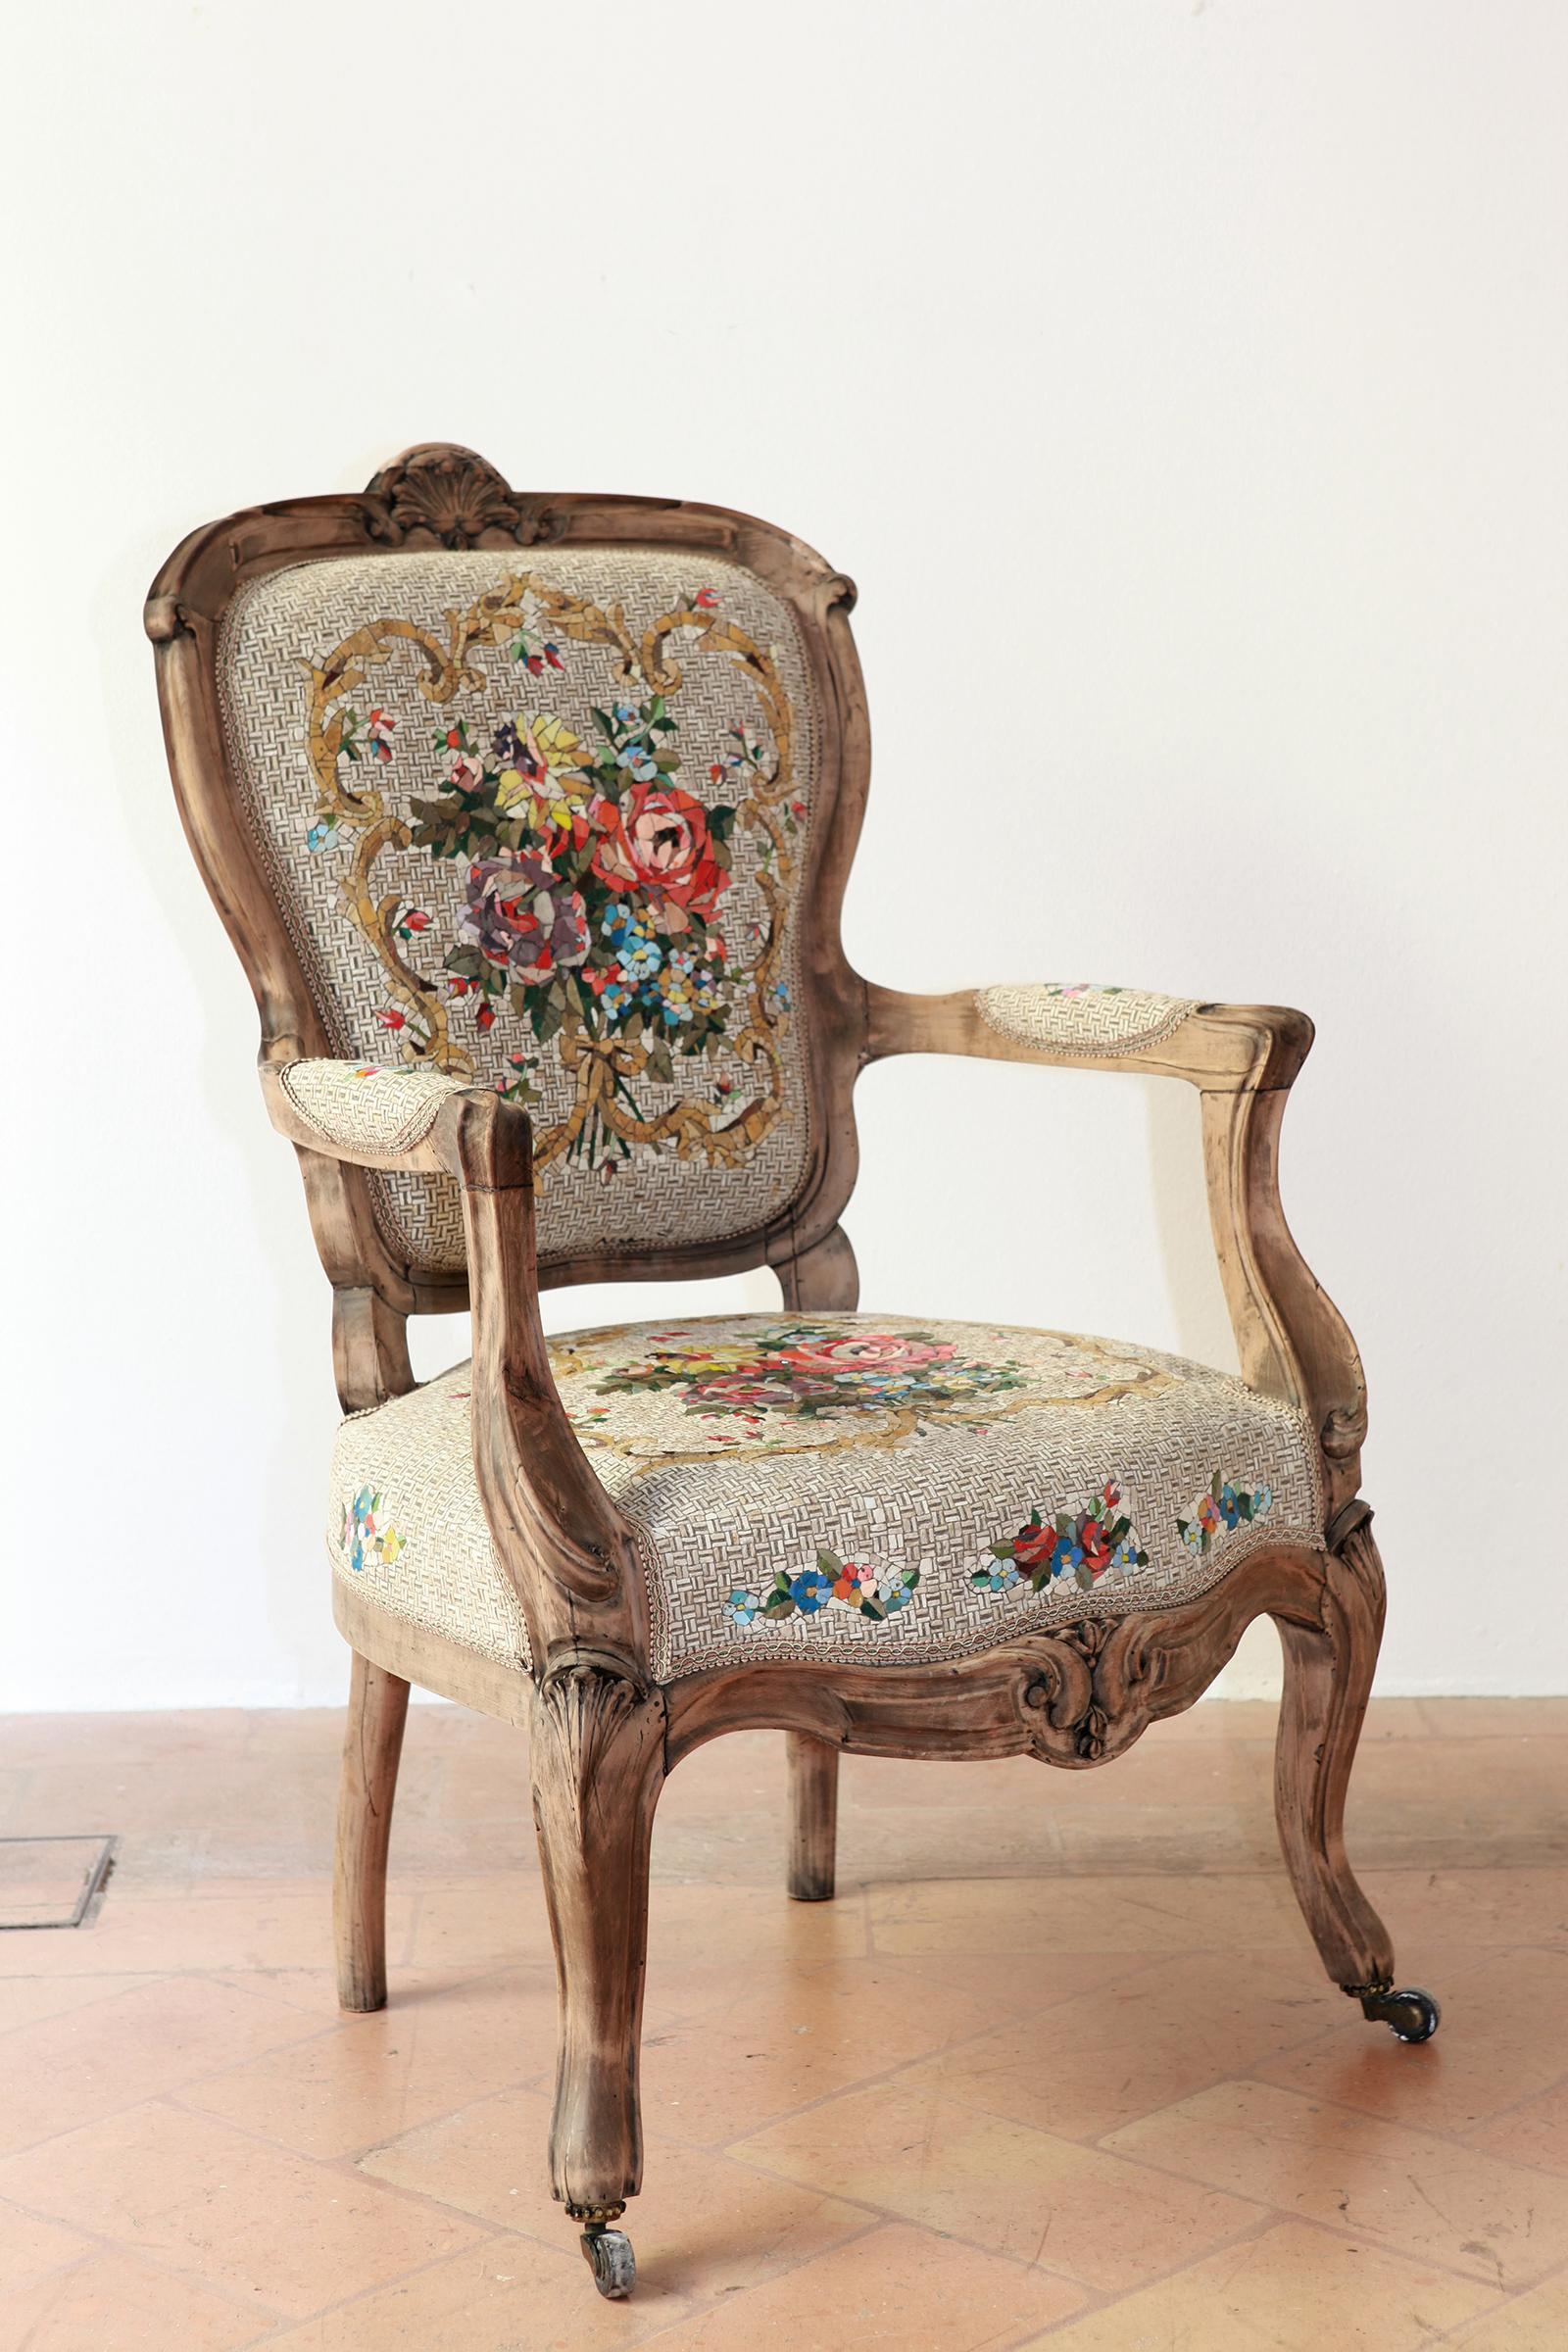 Poltrona Bouquet Antique armchair by Yukiko Nagai.
Dimensions: D65 x W61 x H98 cm.
Material: Marble(Biancone etc.), Natural stone, Venetian color glass, Styrofoam,
Glass fiber, Resin, Cement, Stucco
Weight: 20 kg 

An antique French chair,